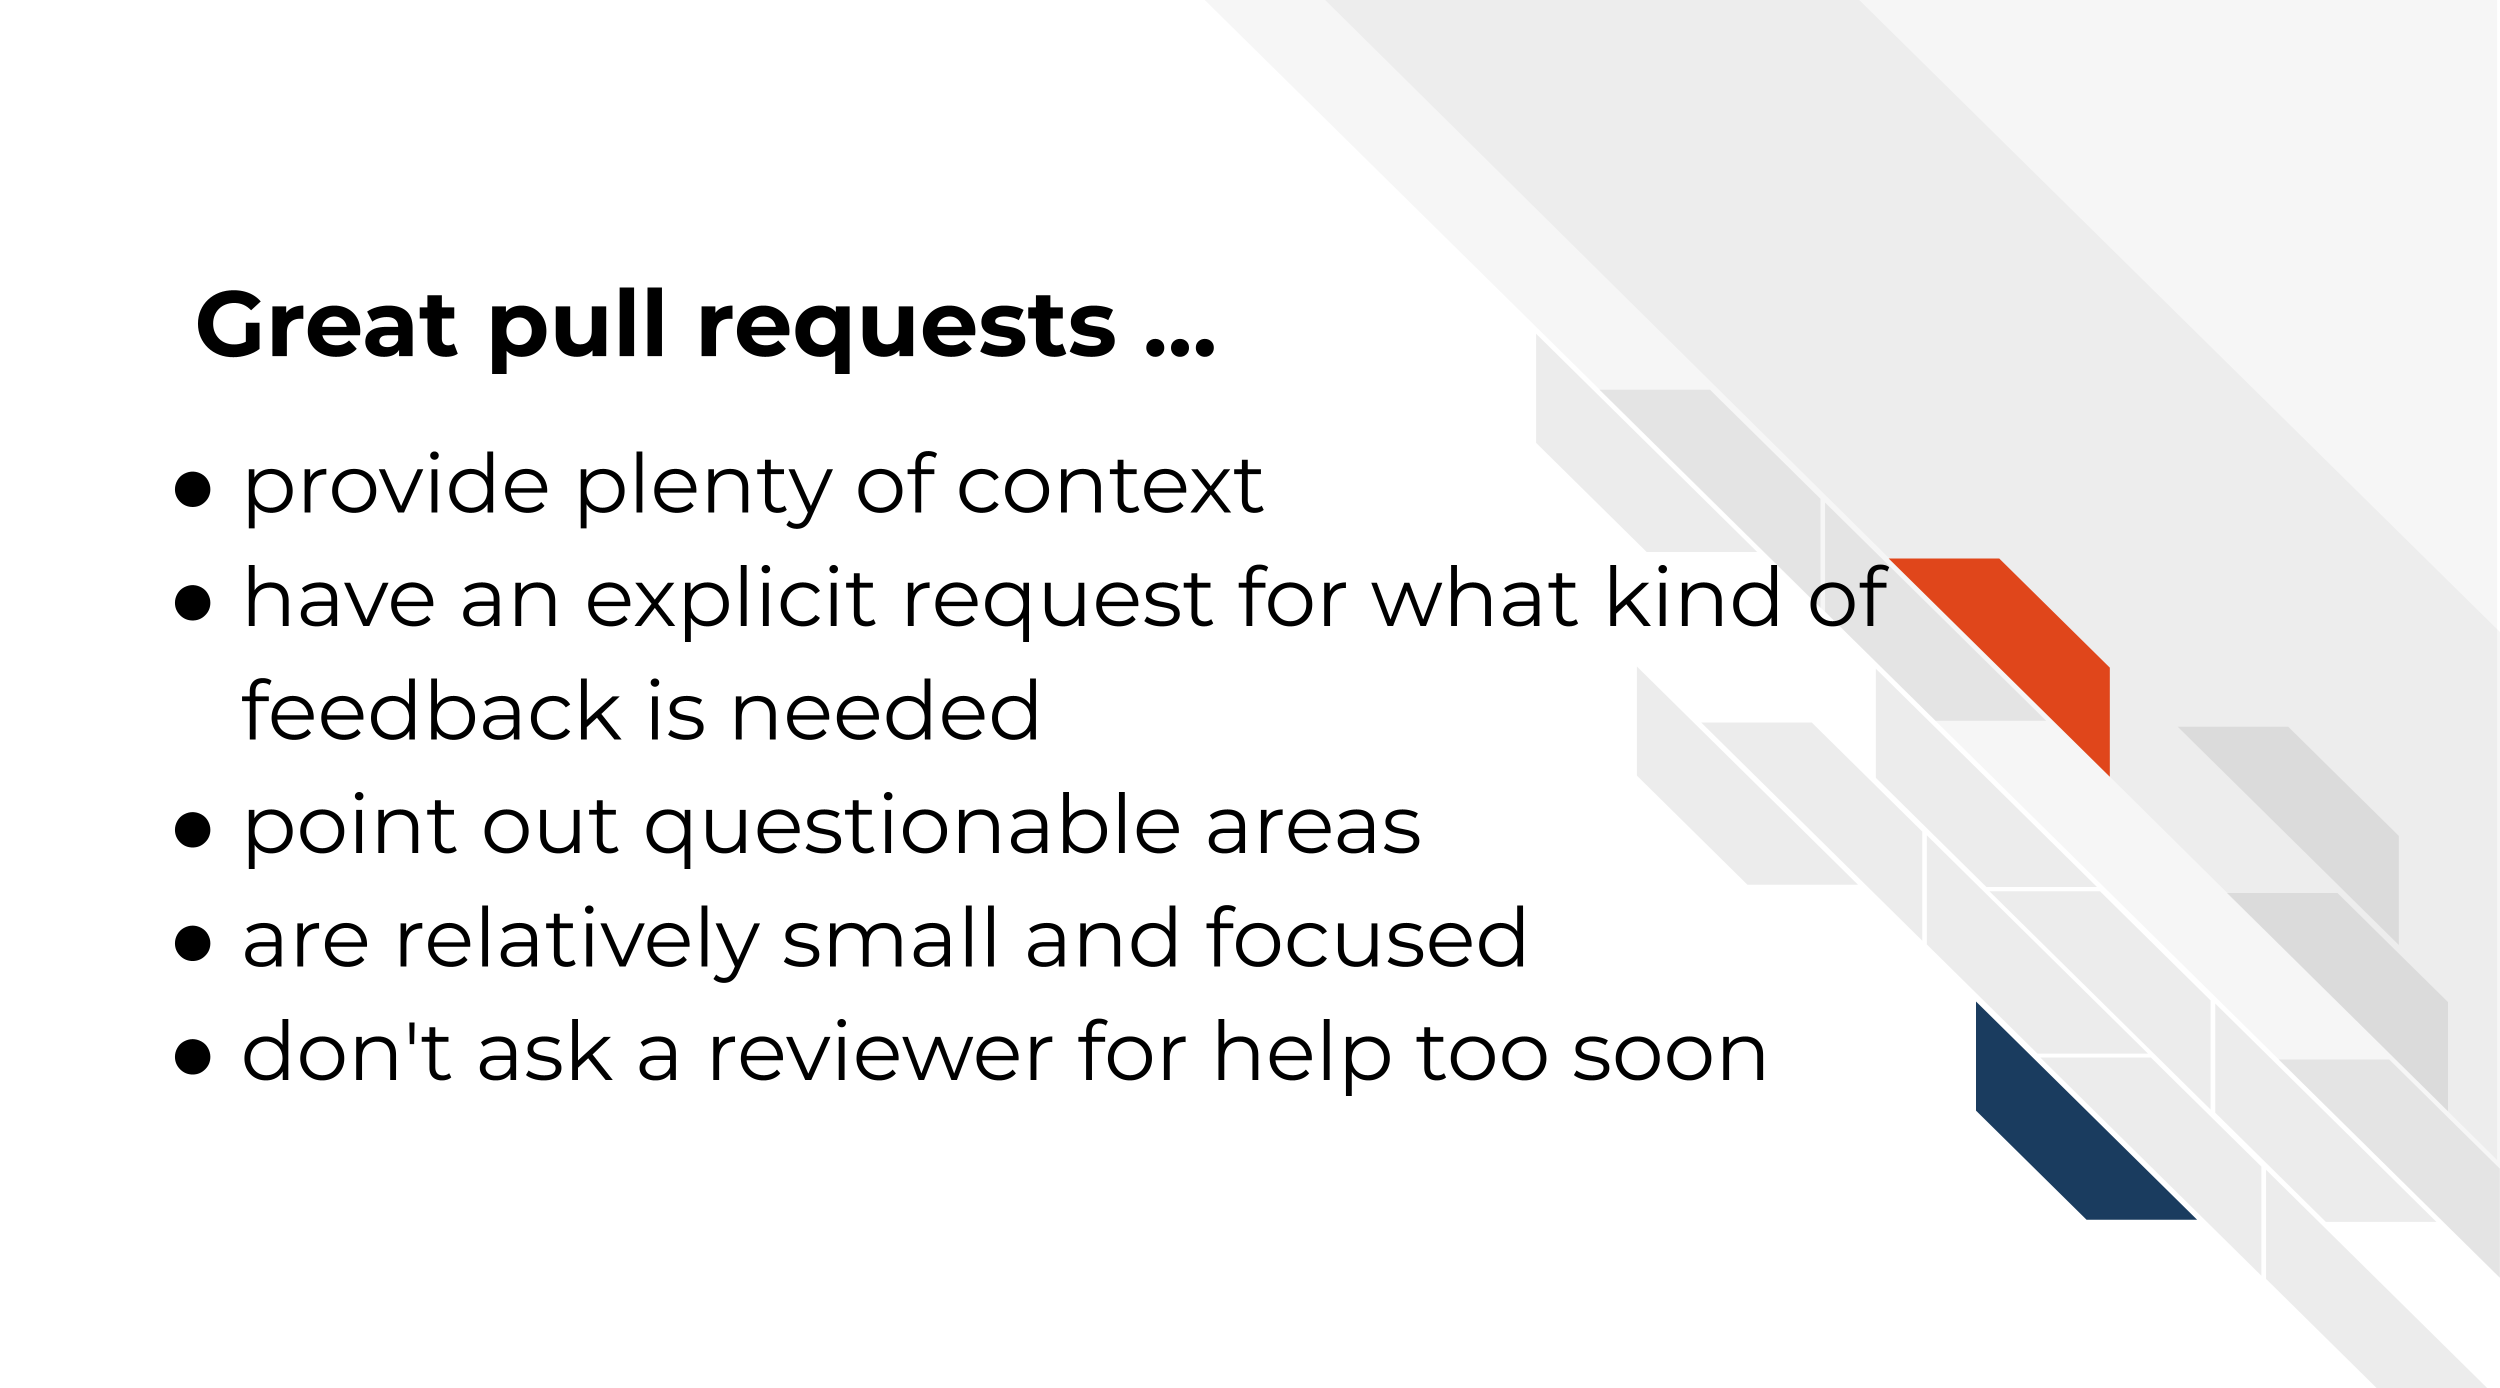 Great pull requests … provide plenty of context, have an explicit request for what kind of feedback is needed, point out questionable areas, are relatively small and focused, don't ask a reviewer for help too soon